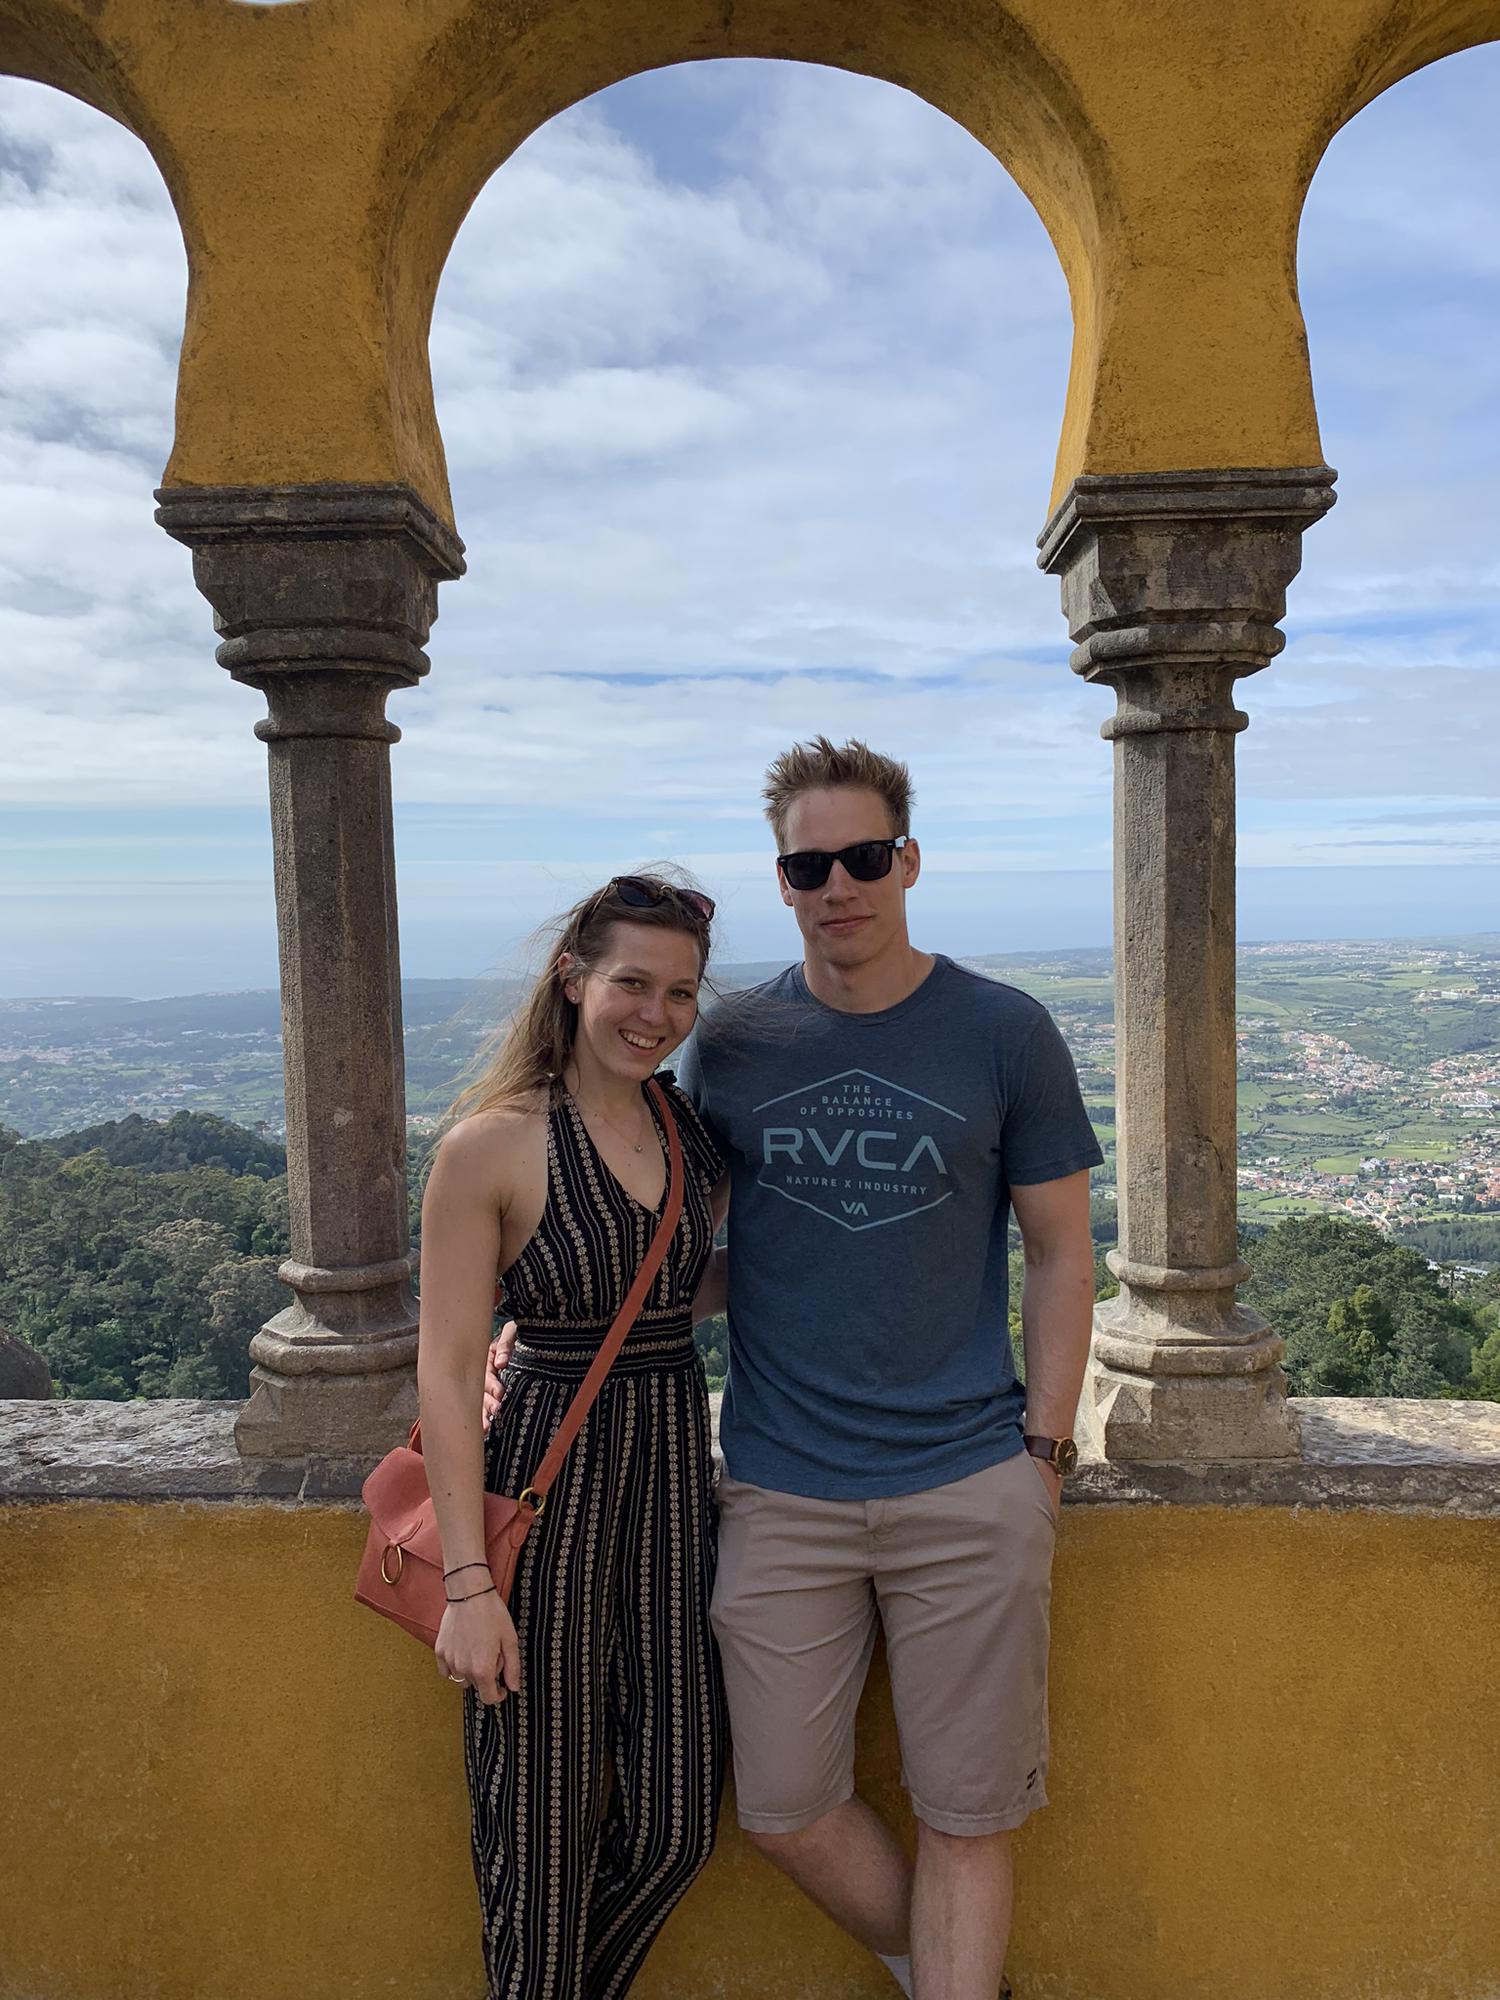 Took our first big vacation and explored so much of Portugal